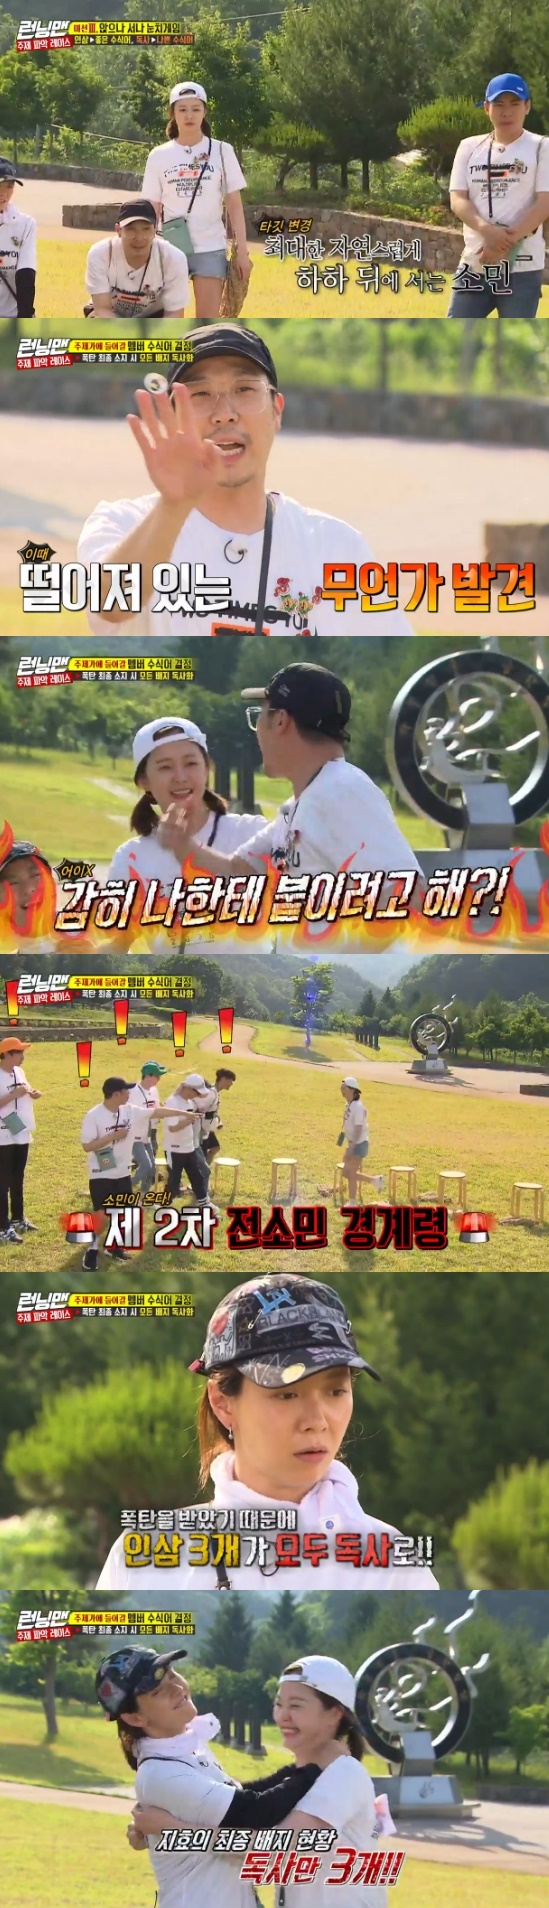 Running Man Jeon So-min handed over the bomb sticker to Song Ji-hyo at the last minute.On the 16th SBS Good Sunday - Running Man, Yoo Jae-Suk won the championship.On this day, a thematic grasp race was held to determine the lyrics of the theme song.The members became Simmani, and each of them started racing with two ginseng and viper badges, each of which was a good modifier for themselves and a viper badge for themselves.There was also a bomb sticker in the mission bag, and if you had a bomb sticker, all the badges would turn into a viper badge.The members were relieved that Yoo Jae-Suks bag must have had a bomb sticker when he saw Yoo Jae-Suk with his mission bag.The bomb sticker was really possessed by Yoo Jae-Suk. Yoo Jae-Suk put a sticker on Ji Suk-jins bag before the first mission began.In the first mission, Lee Kwang-soo and Yang Se-chan were selected as team leaders, and everyone was reluctant to use ginseng masks.Mission is a Game where the song is drawn as a relay with the citizens as You and My Connection Picture.After laughing and talking and playing Game, the production team said the bomb sticker was moved: Ji Suk-jin put the bomb on Lee Kwang-soos shoes.But Lee didnt know, and an hour later, one of the viper badges was added, and the crew sent a message to Lee that he had a bomb sticker.The second mission was Mystery Sellers, explaining to the rest of the members without knowing the identity of the object, and getting the score as concrete.Kim Jong-guk and Song Ji-hyo, the first team, delivered a poison badge to Ji Suk-jin. Yoo Jae-Suk and Haha, the second team, delivered a poison badge to Jeon So-min.Then another hour passed, and another viper badge was added to Lee. Lee finally found the bomb sticker at the next pRace.The third mission was Sit but Sit or Sit, and while ginseng and viper came and went, Jeon So-min found a sticker.Jeon Sang-min tried to attach a sticker to Lee Kwang-soo, but when he did not get it, he changed the target to Haha.But Haha noticed, and everyone was wary of the former. Jeon did not give up until the end, and stickers were attached to the bag on the floor.The winner, Yoo Jae-Suk, decided on the modifier according to the number of ginseng and vipers that the members had.Photo = SBS Broadcasting Screen